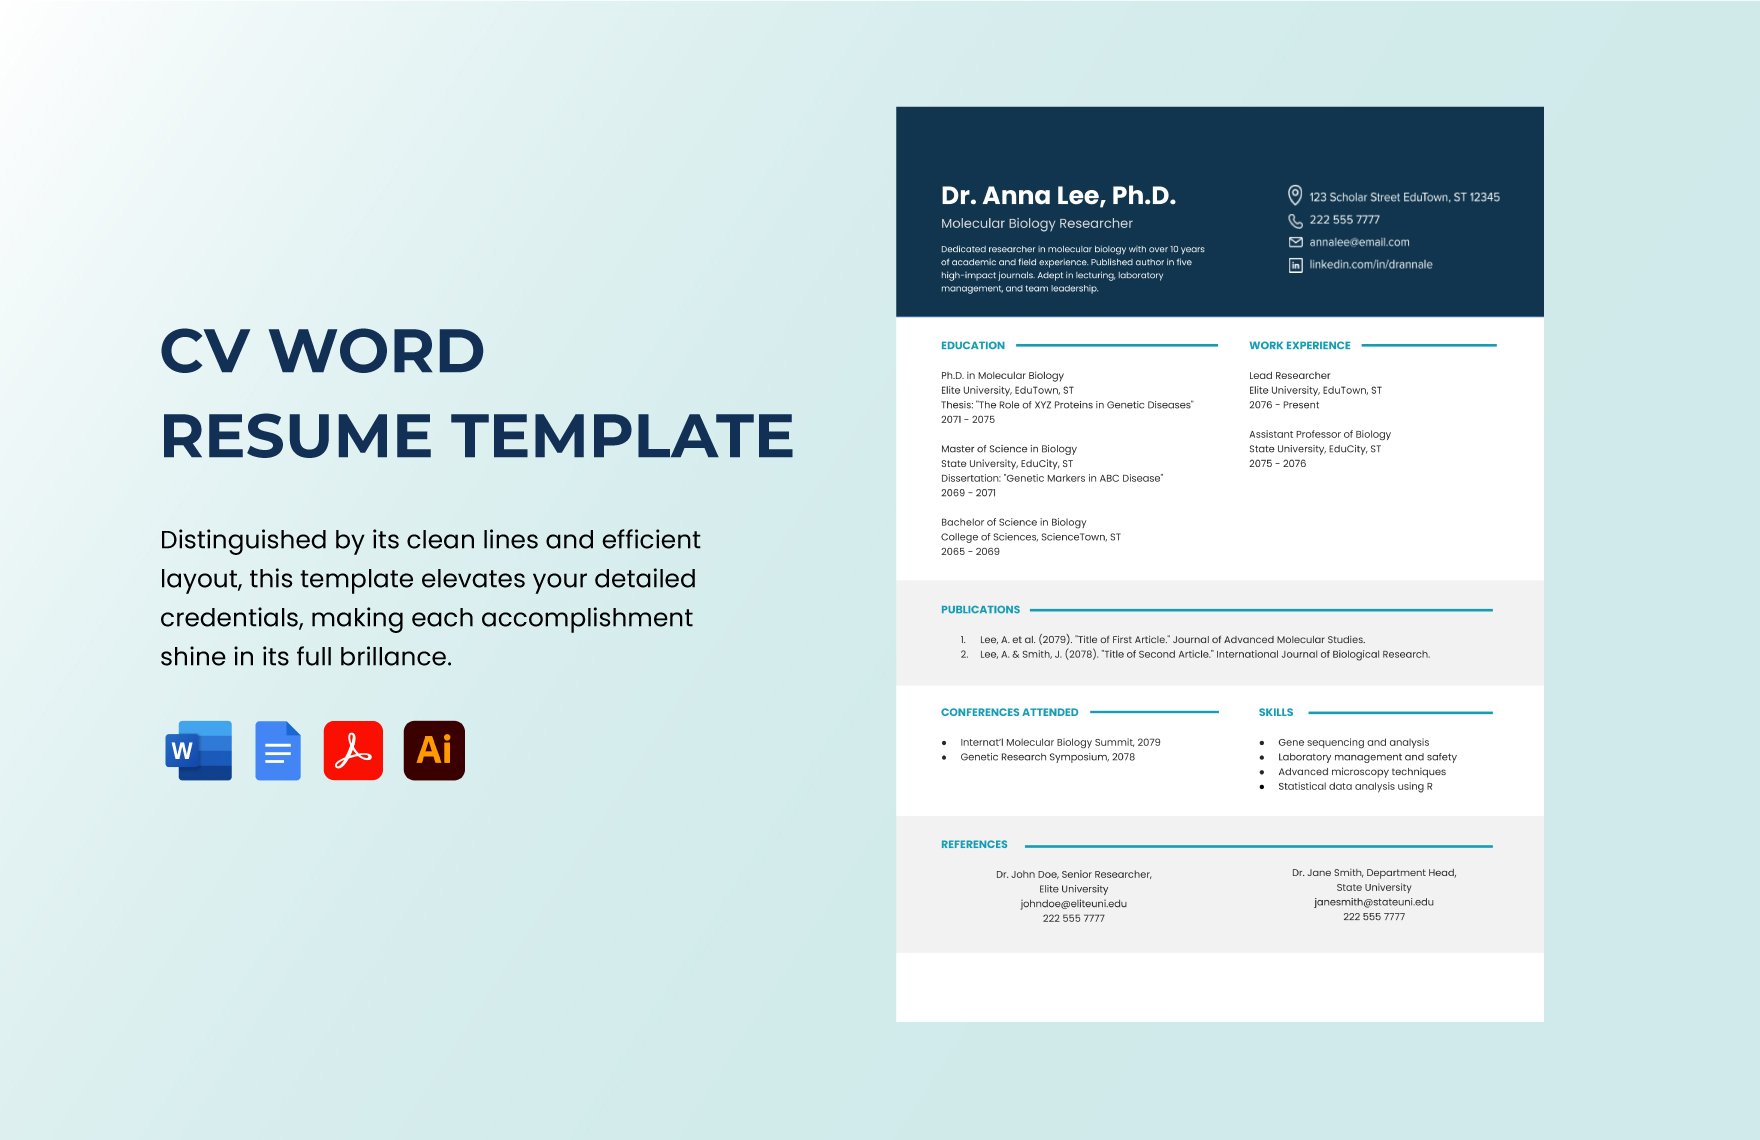 Free CV Word Resume Template in Word, Google Docs, PDF, Illustrator, Apple Pages